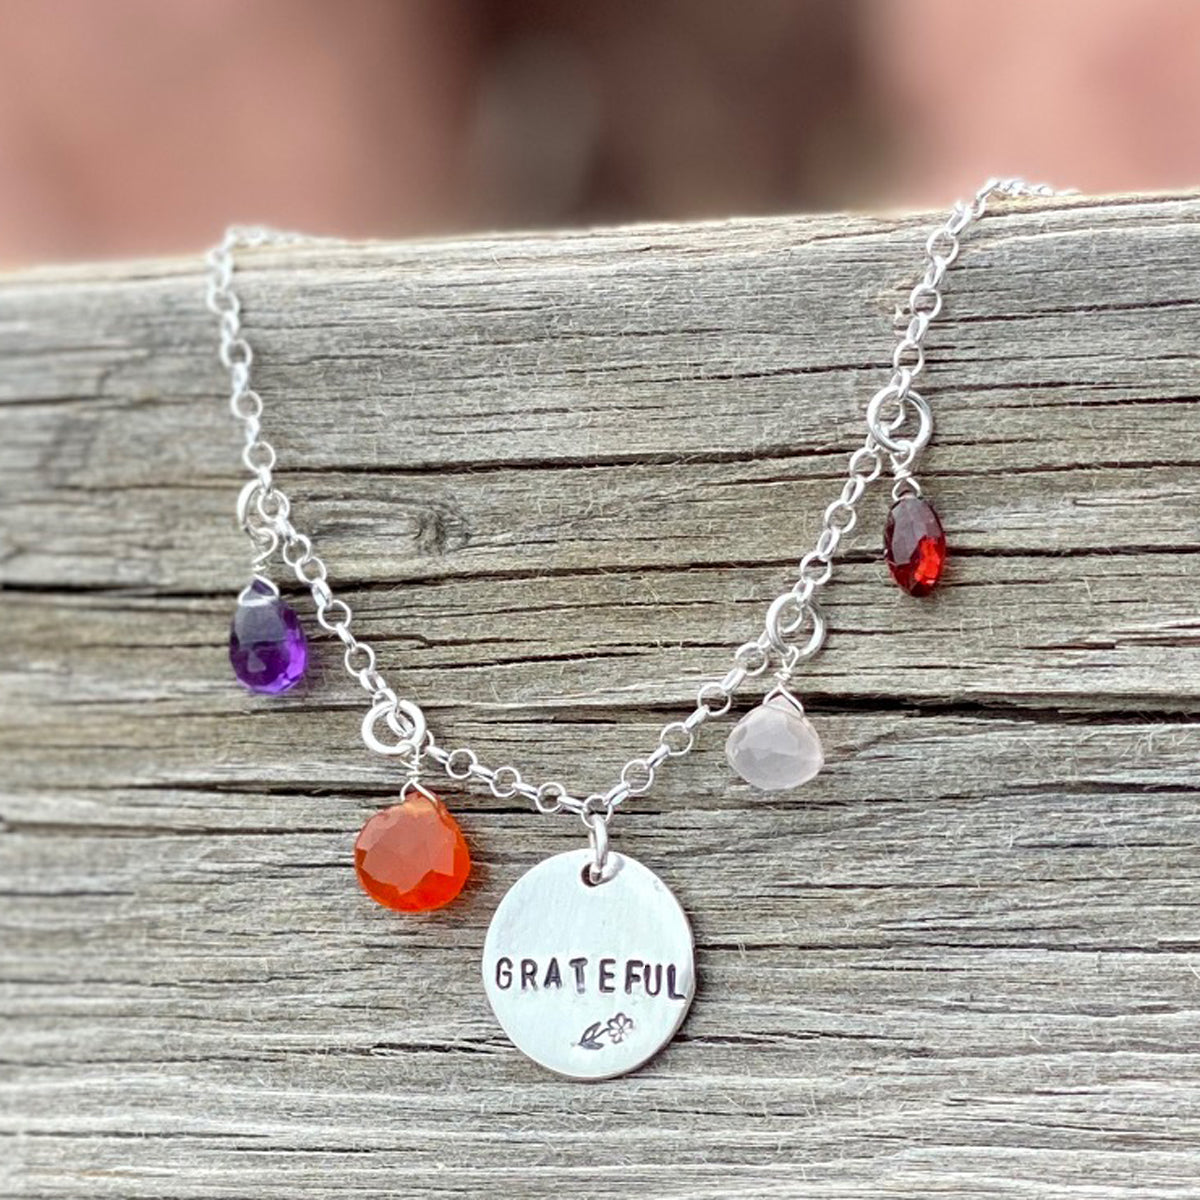 GRATEFUL Motivational Sterling Silver Necklace with Healing Crystals for Gratitude Practice. What are grateful for? It has been Scientifically proven, having a gratitude practice  increases happiness and empathy, reduce depression and anxiety.  Gratitude is an Attitude. ⁣⁣Wear these crystals for cultivating Gratitude.